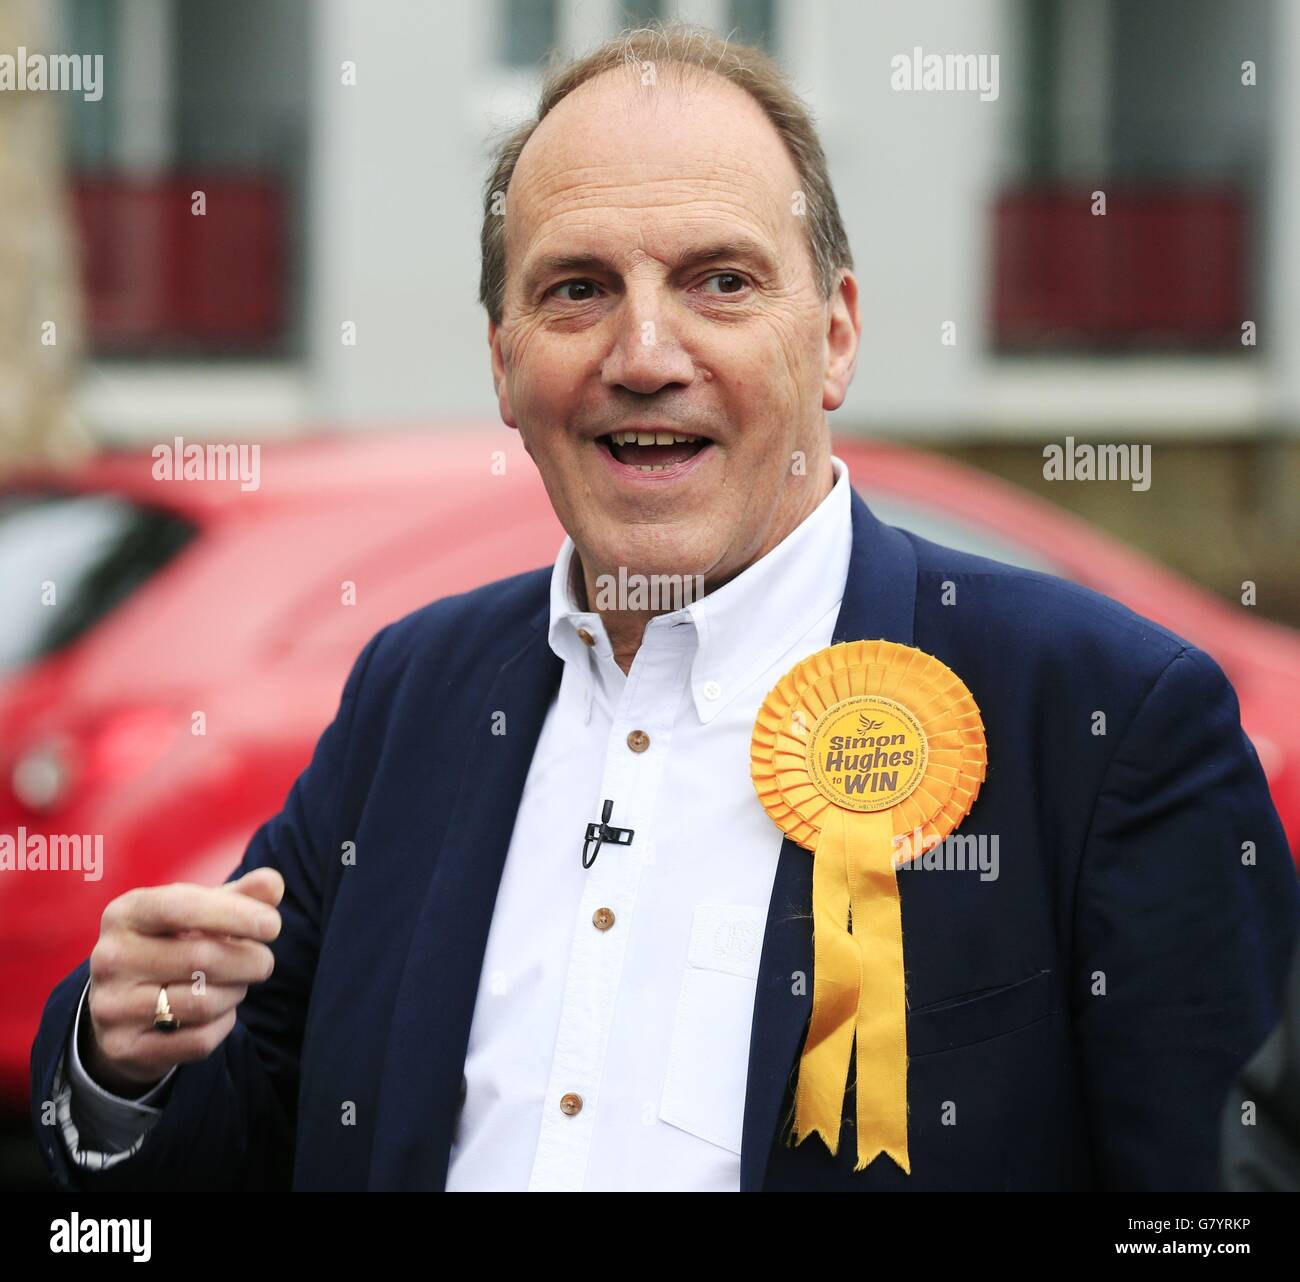 RETRANSMITTED CORRECTING LOCATION Liberal Democrat Party parliamentary candidate for Bermondsey and Old Southwark Simon Hughes attends a campaign rally at Rennie and Manor Estates Tenants Association Hall, Bermondsey, London. Stock Photo